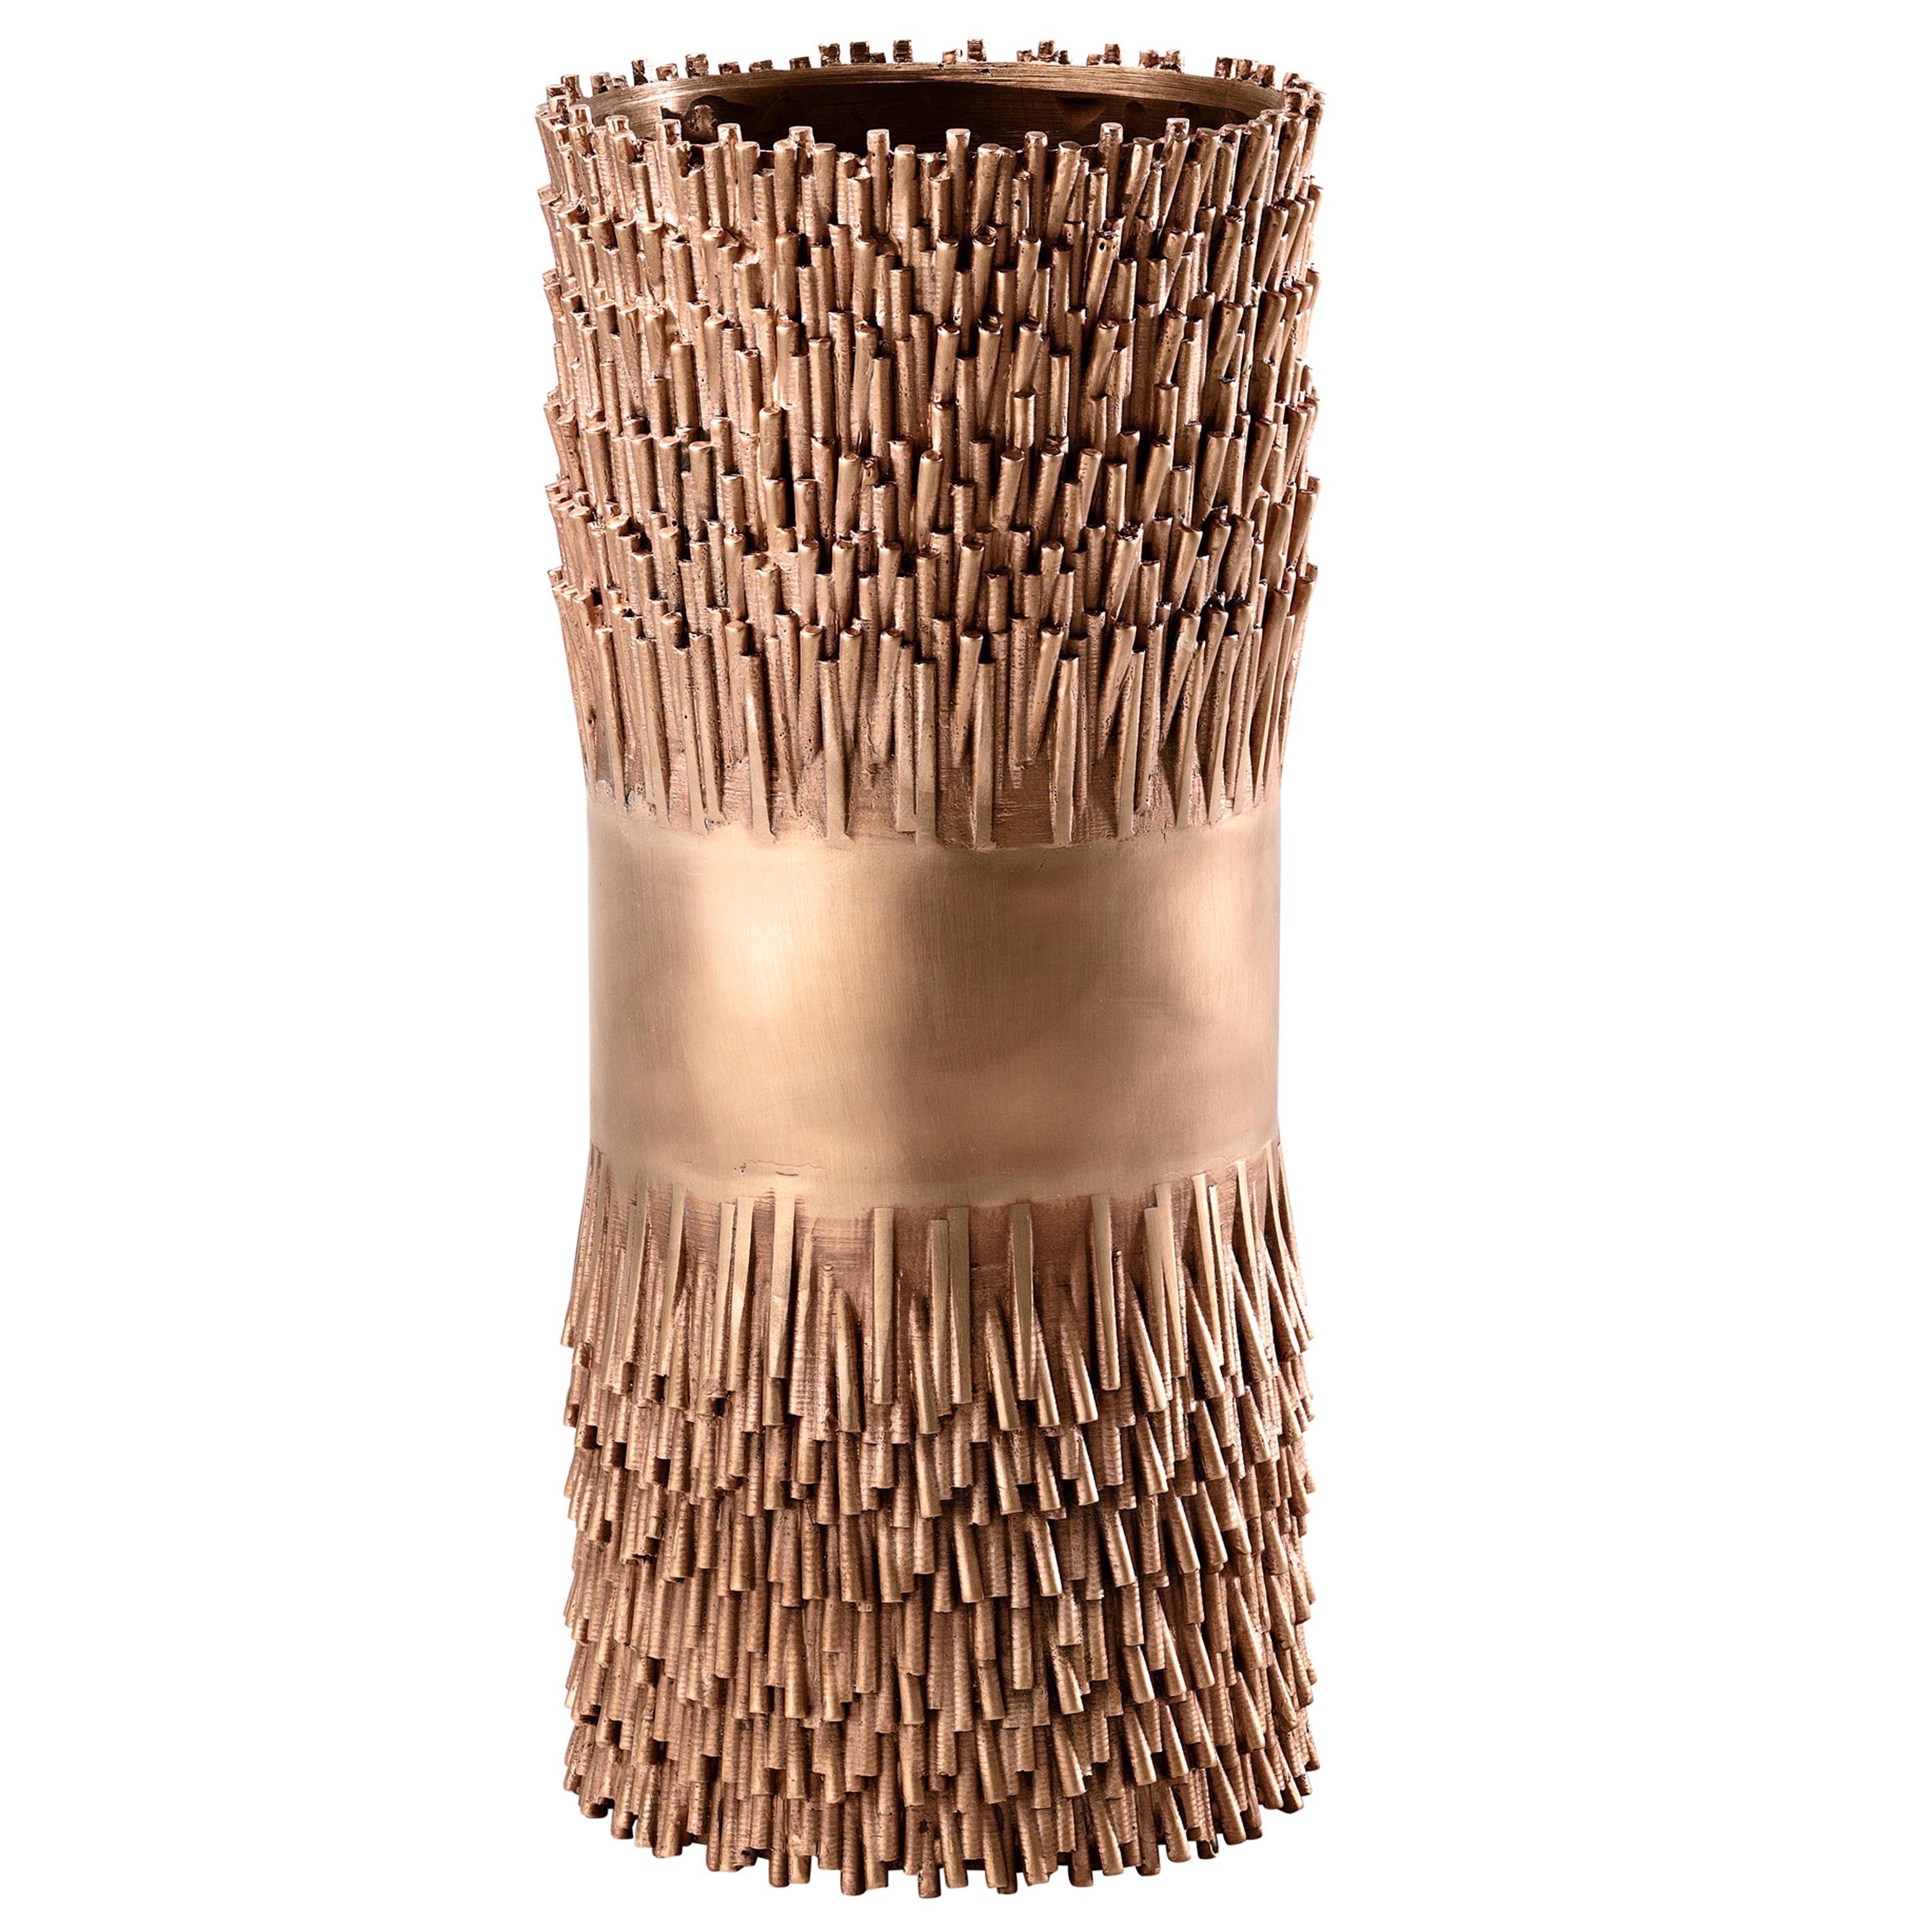 For Sale: Pink (Bronze) Ghidini 1961 Jack Fruit Sculptural Vase by Campana Brothers